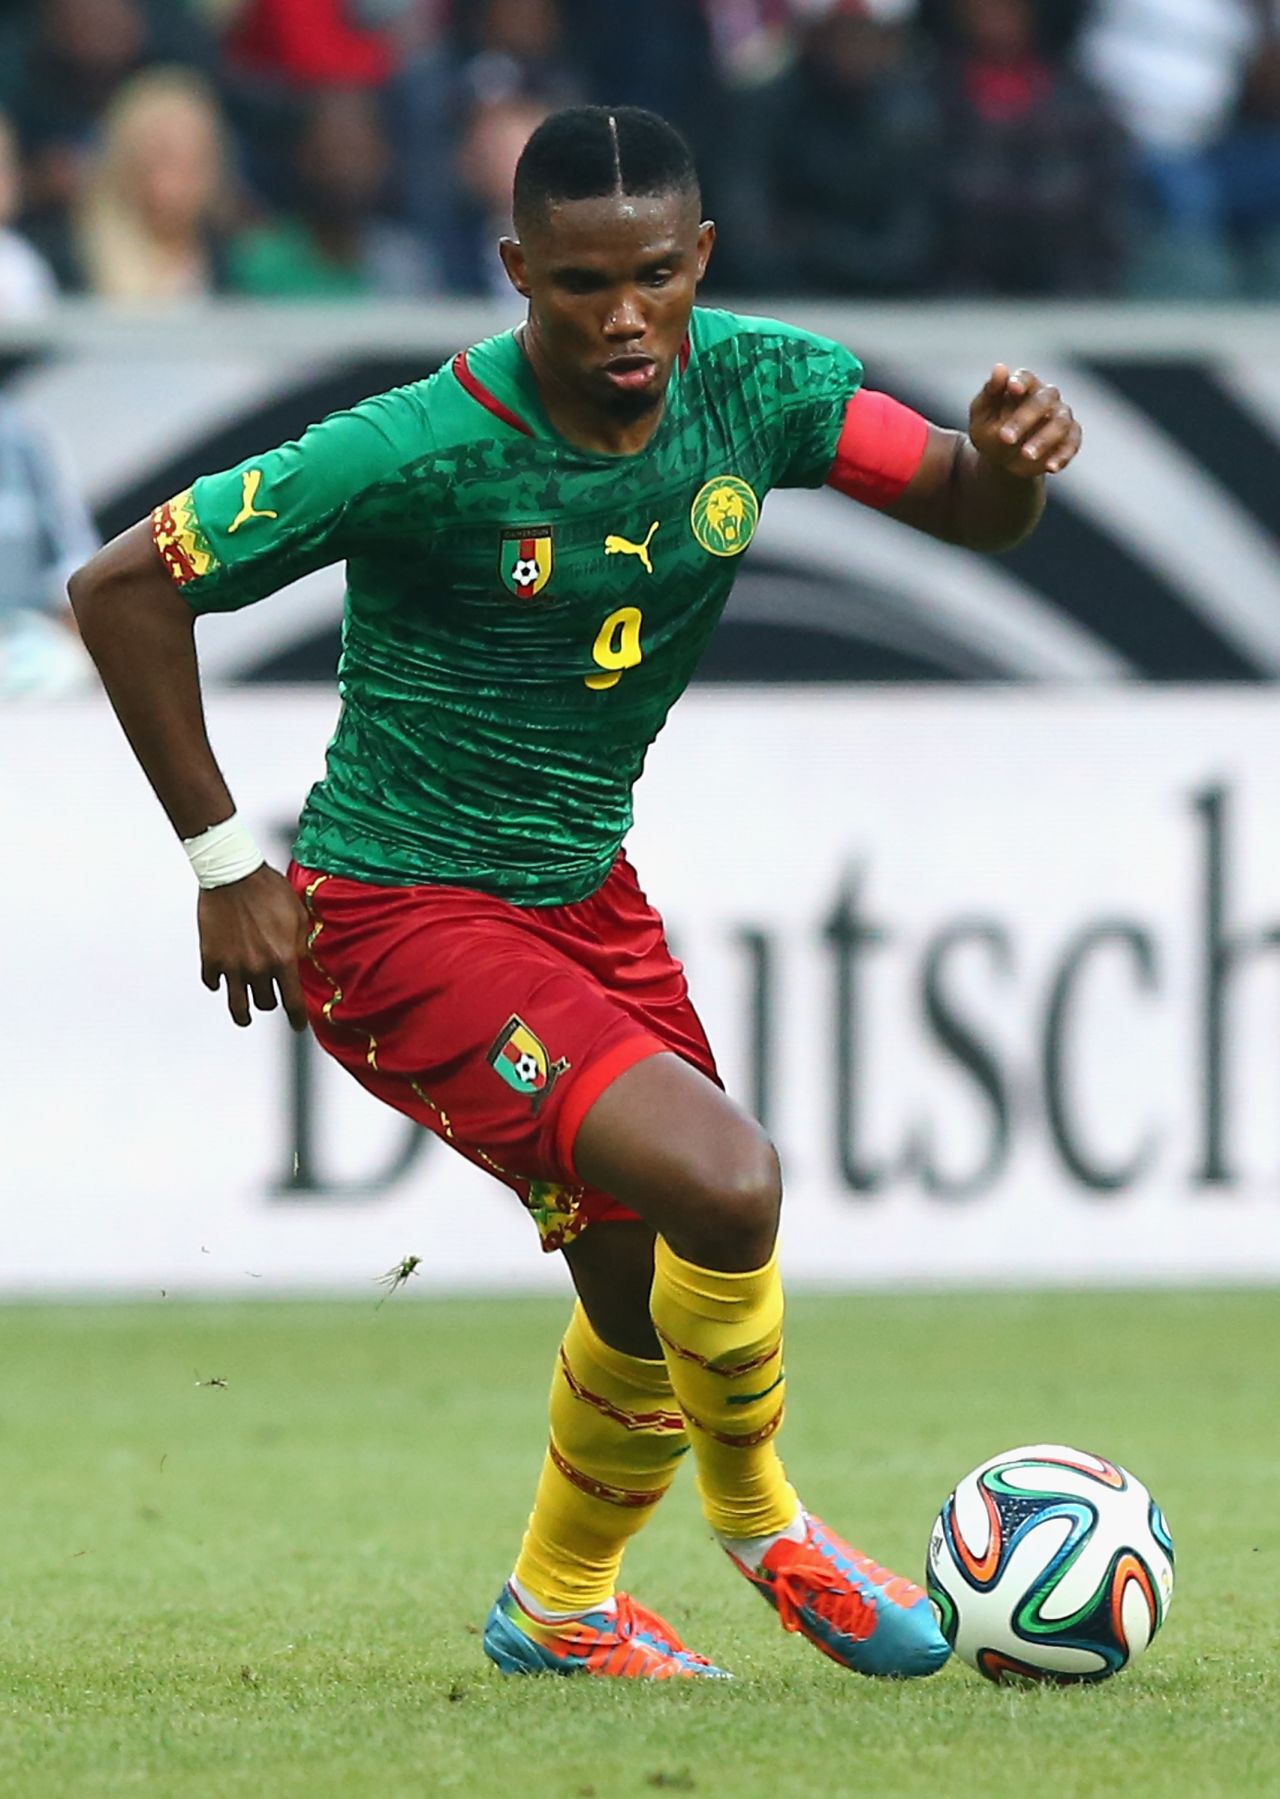 Arguably Africa's most accomplished player, Eto'o played for Cameroon and most notably, Barcelona. He's scored in two Champions League finals and has played in four World Cups.  